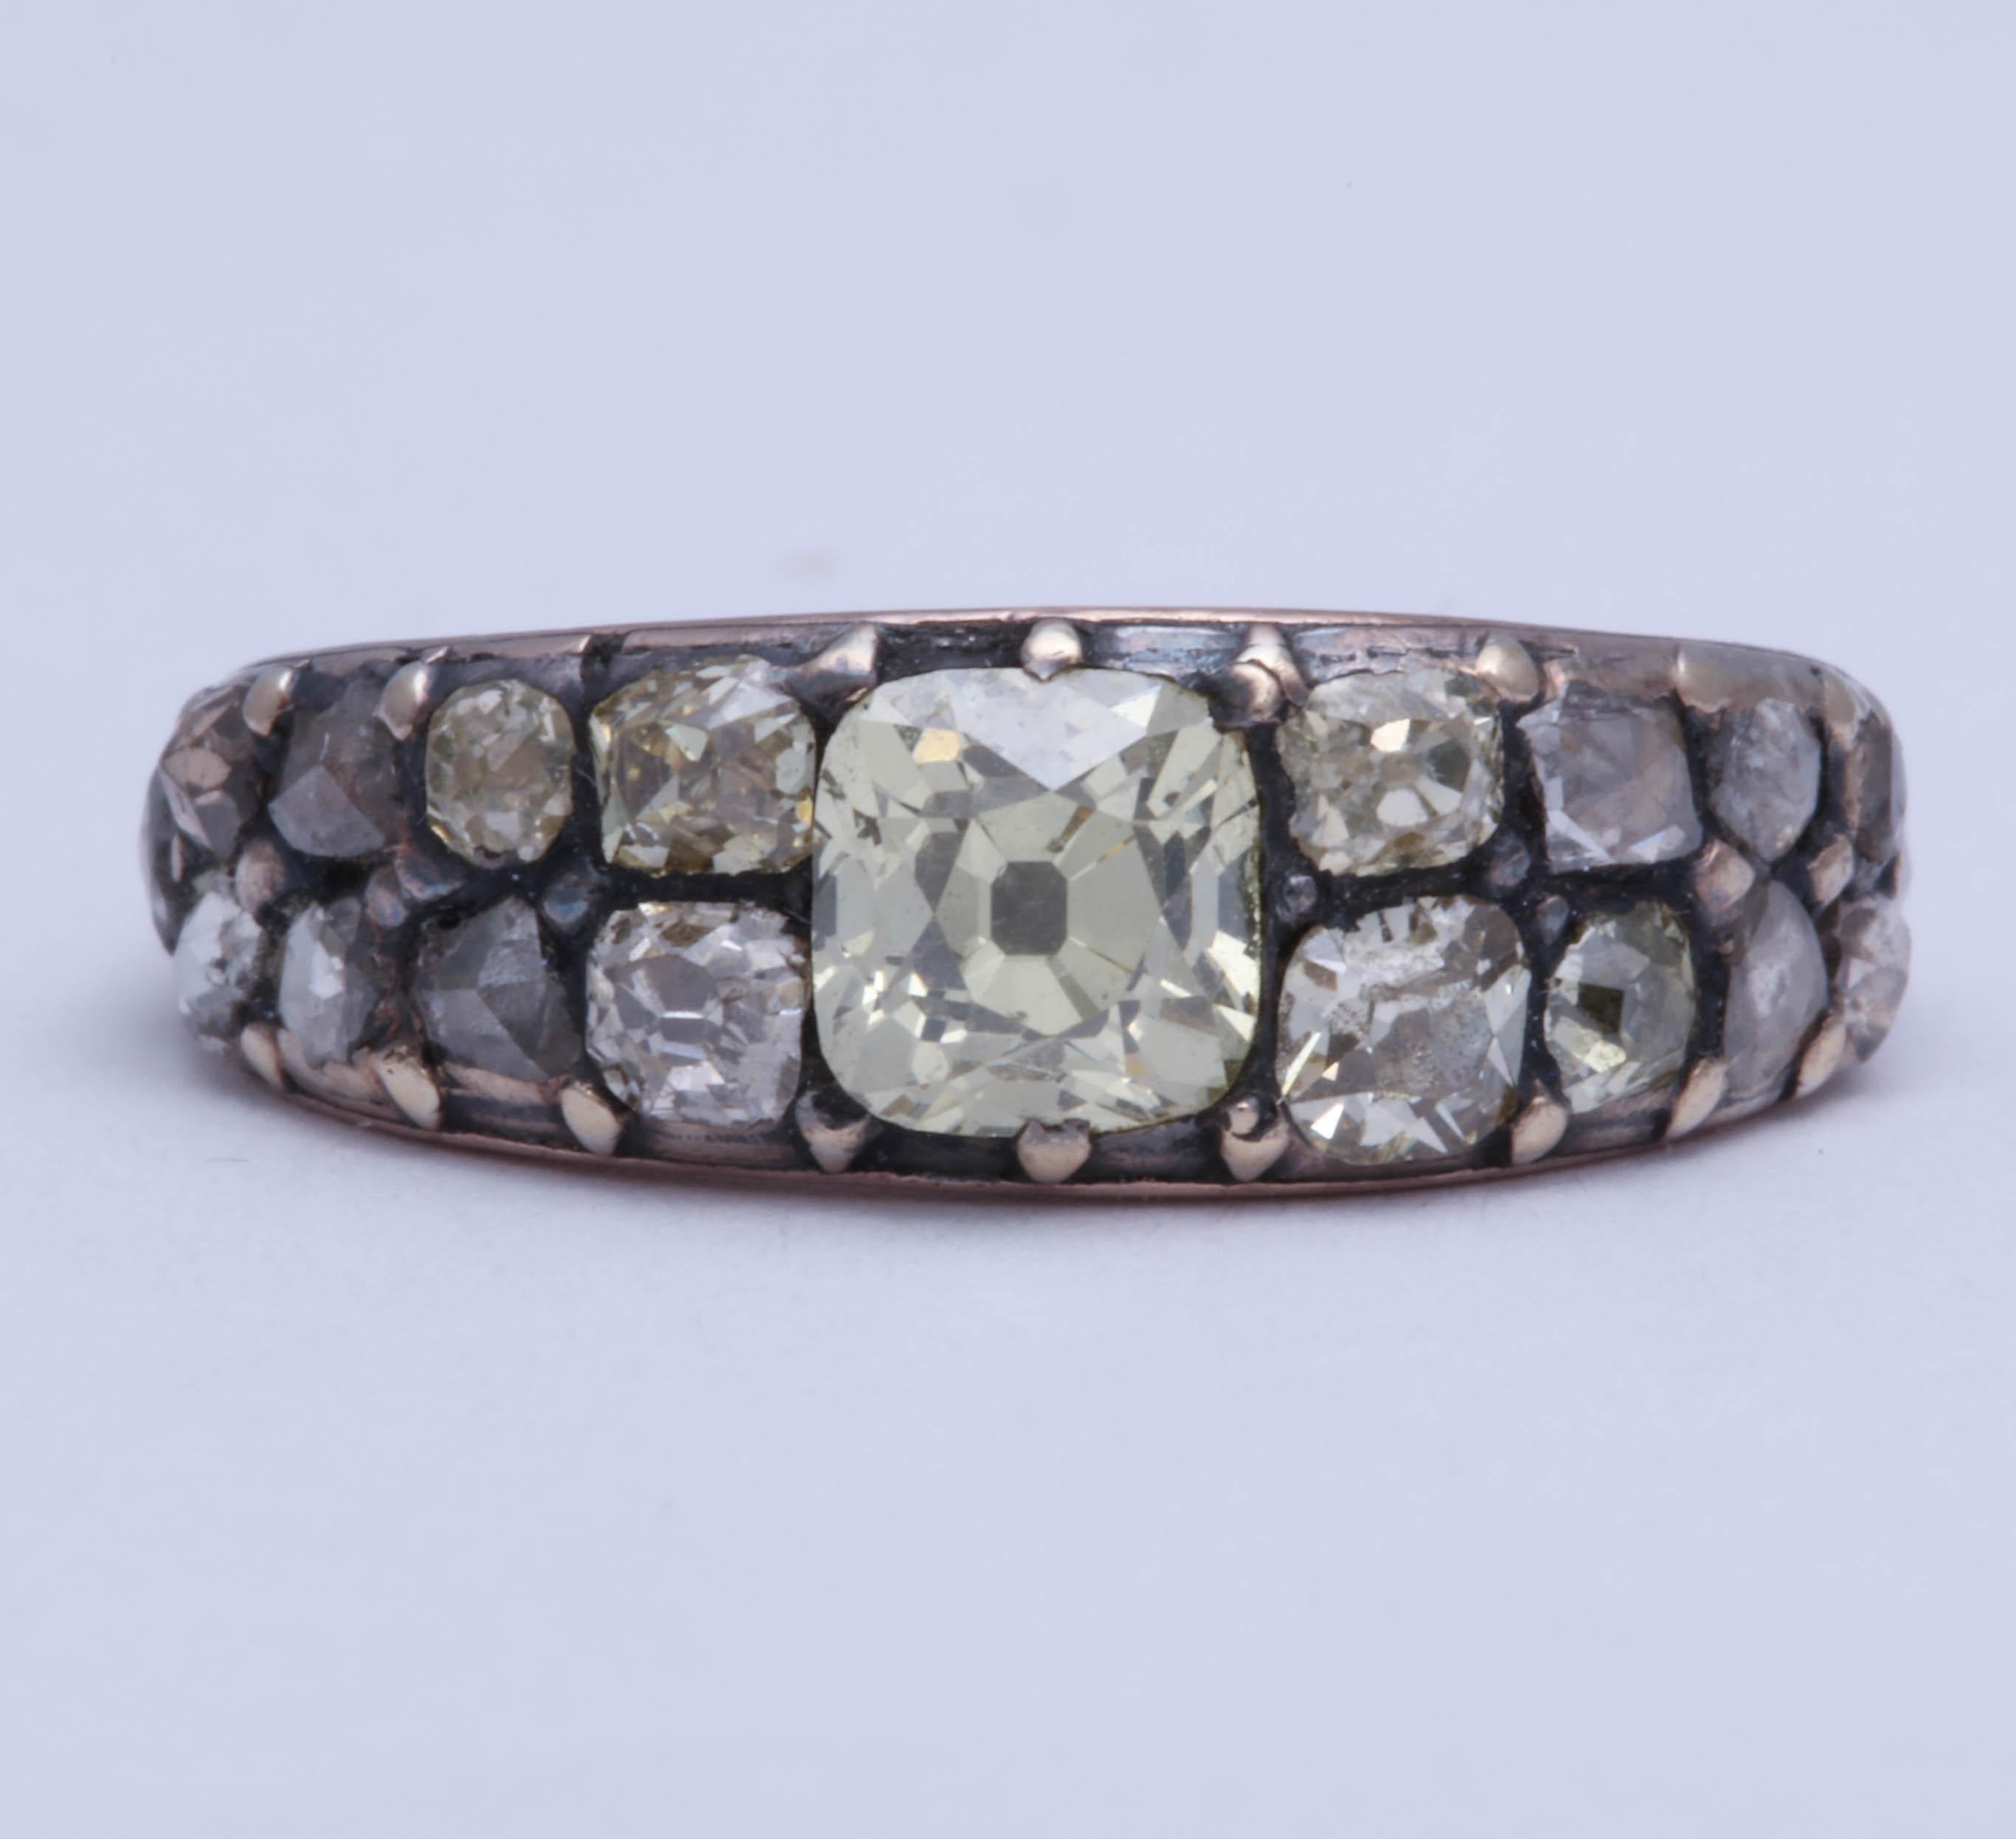 The diamonds, totaling 18 old mine and rose cuts, are set in silver over 18K yellow gold. Closed back setting. 